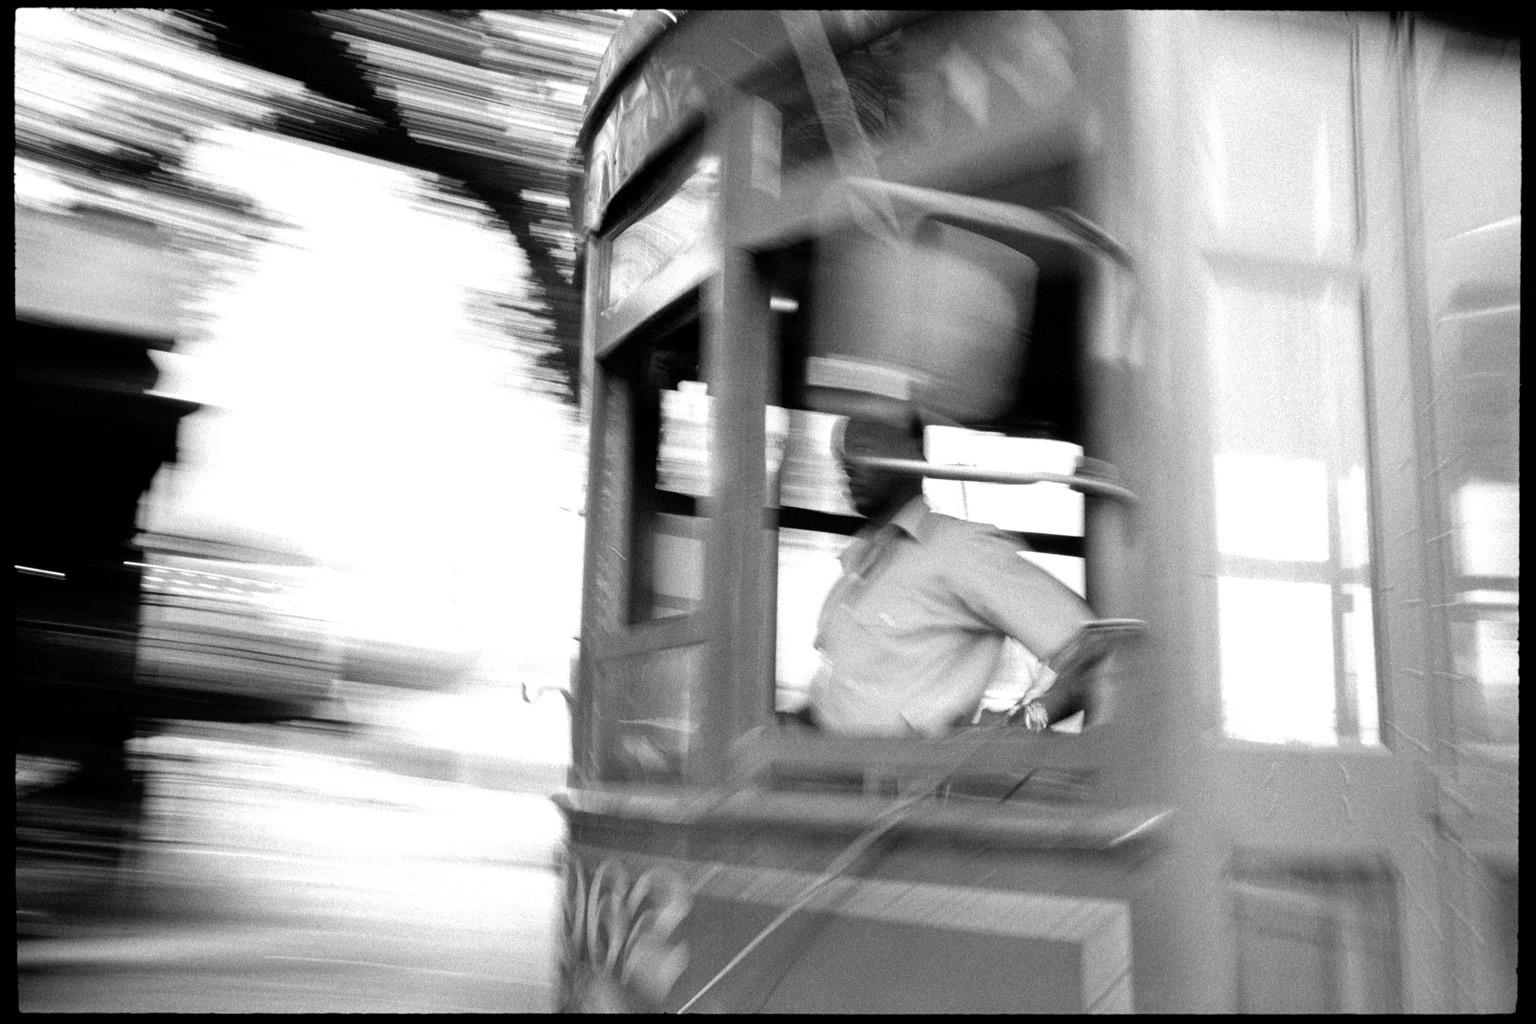 Jean-Luc Fievet Black and White Photograph - 1999-New Orleans - Black & White Photograph of New Orleans Street Car Conductor